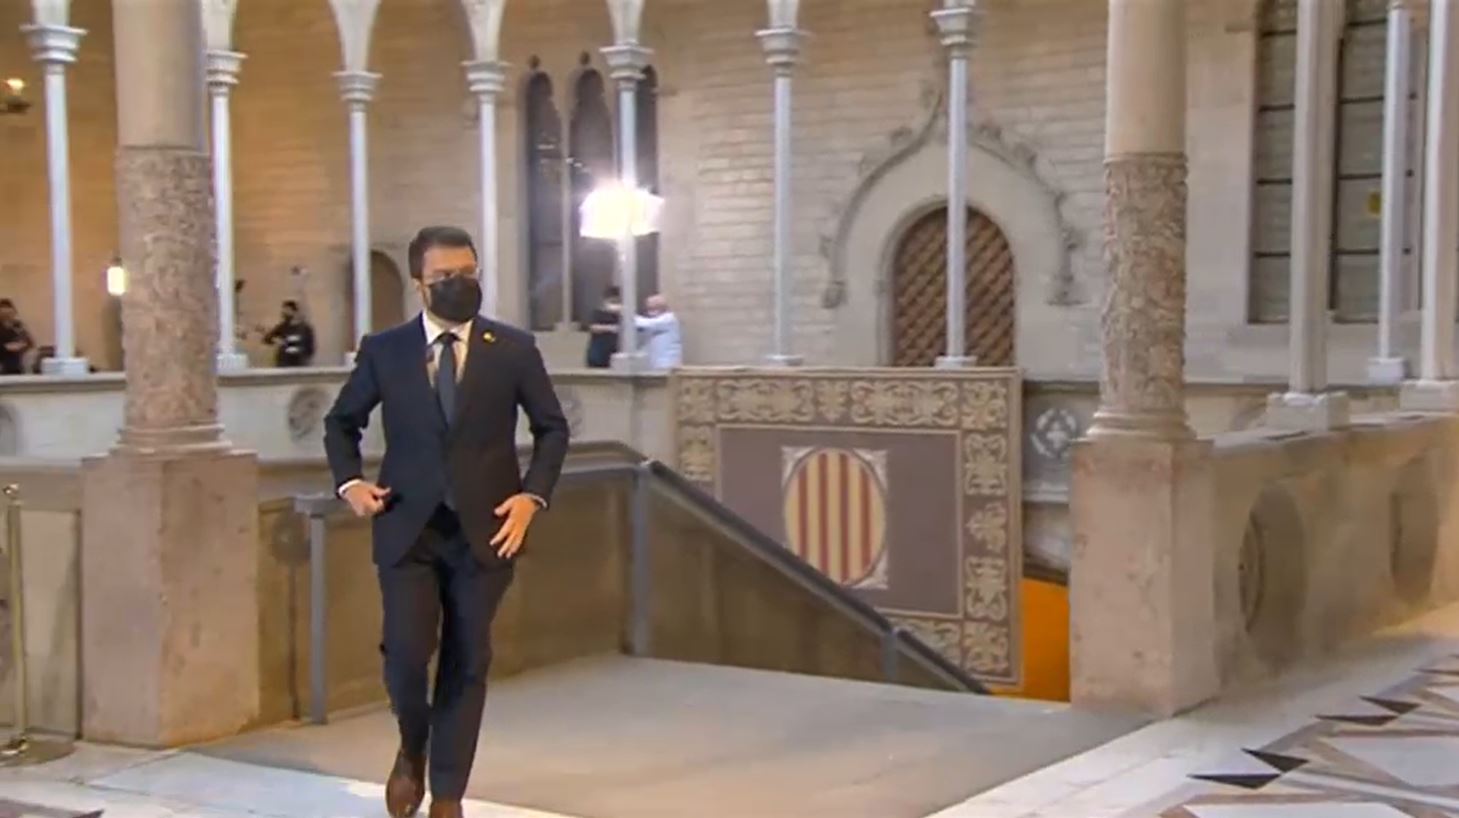 Pere Aragonès walks in the Catalan government headquarters building during the ceremony to swear him in as president (image from TV3 broadcast)